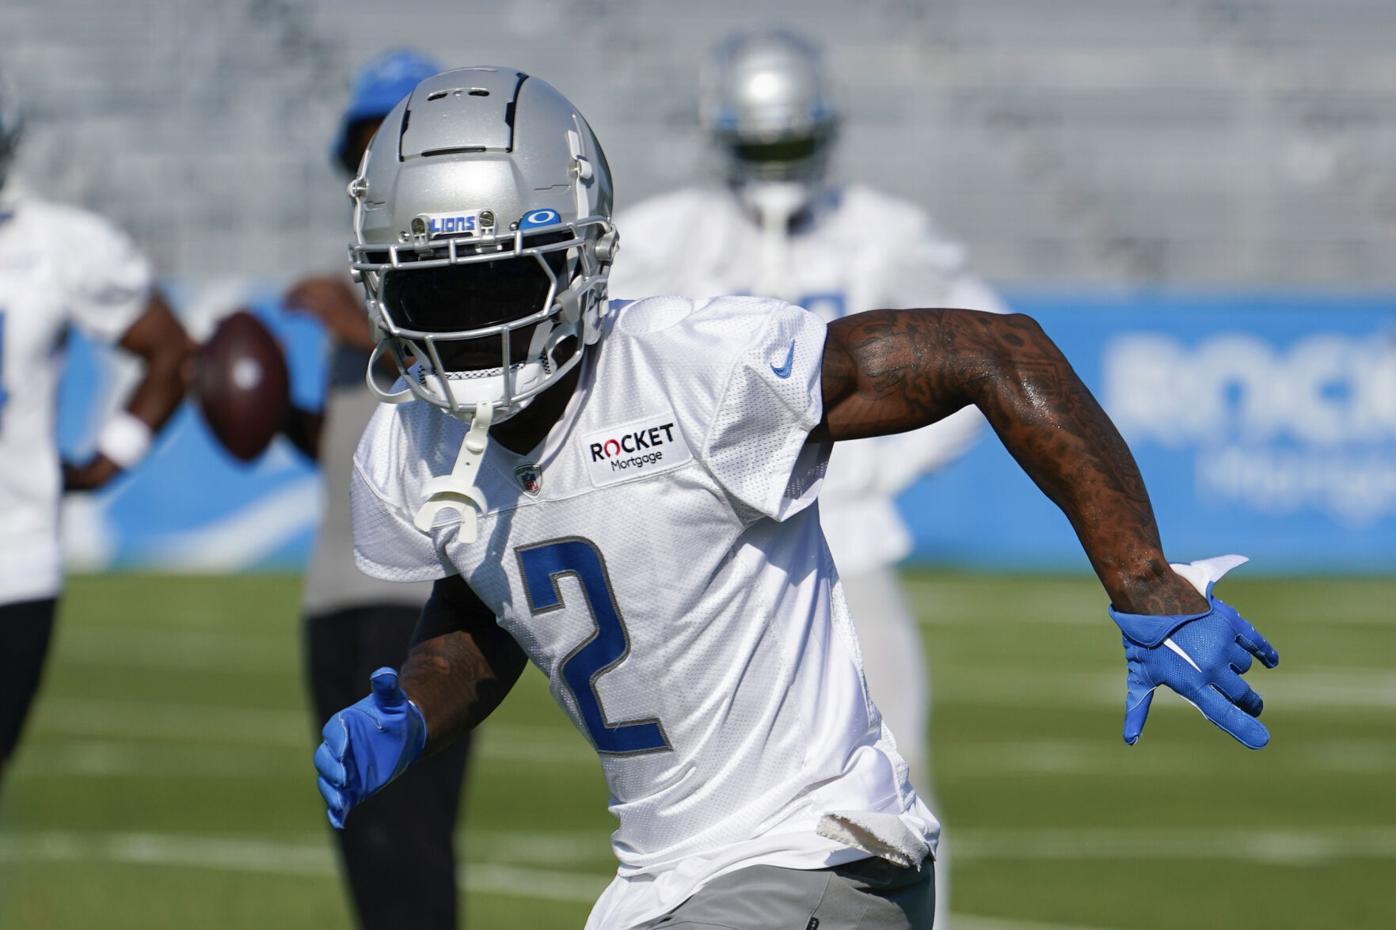 Lions C.J. Gardner-Johnson carted off practice field; appears to